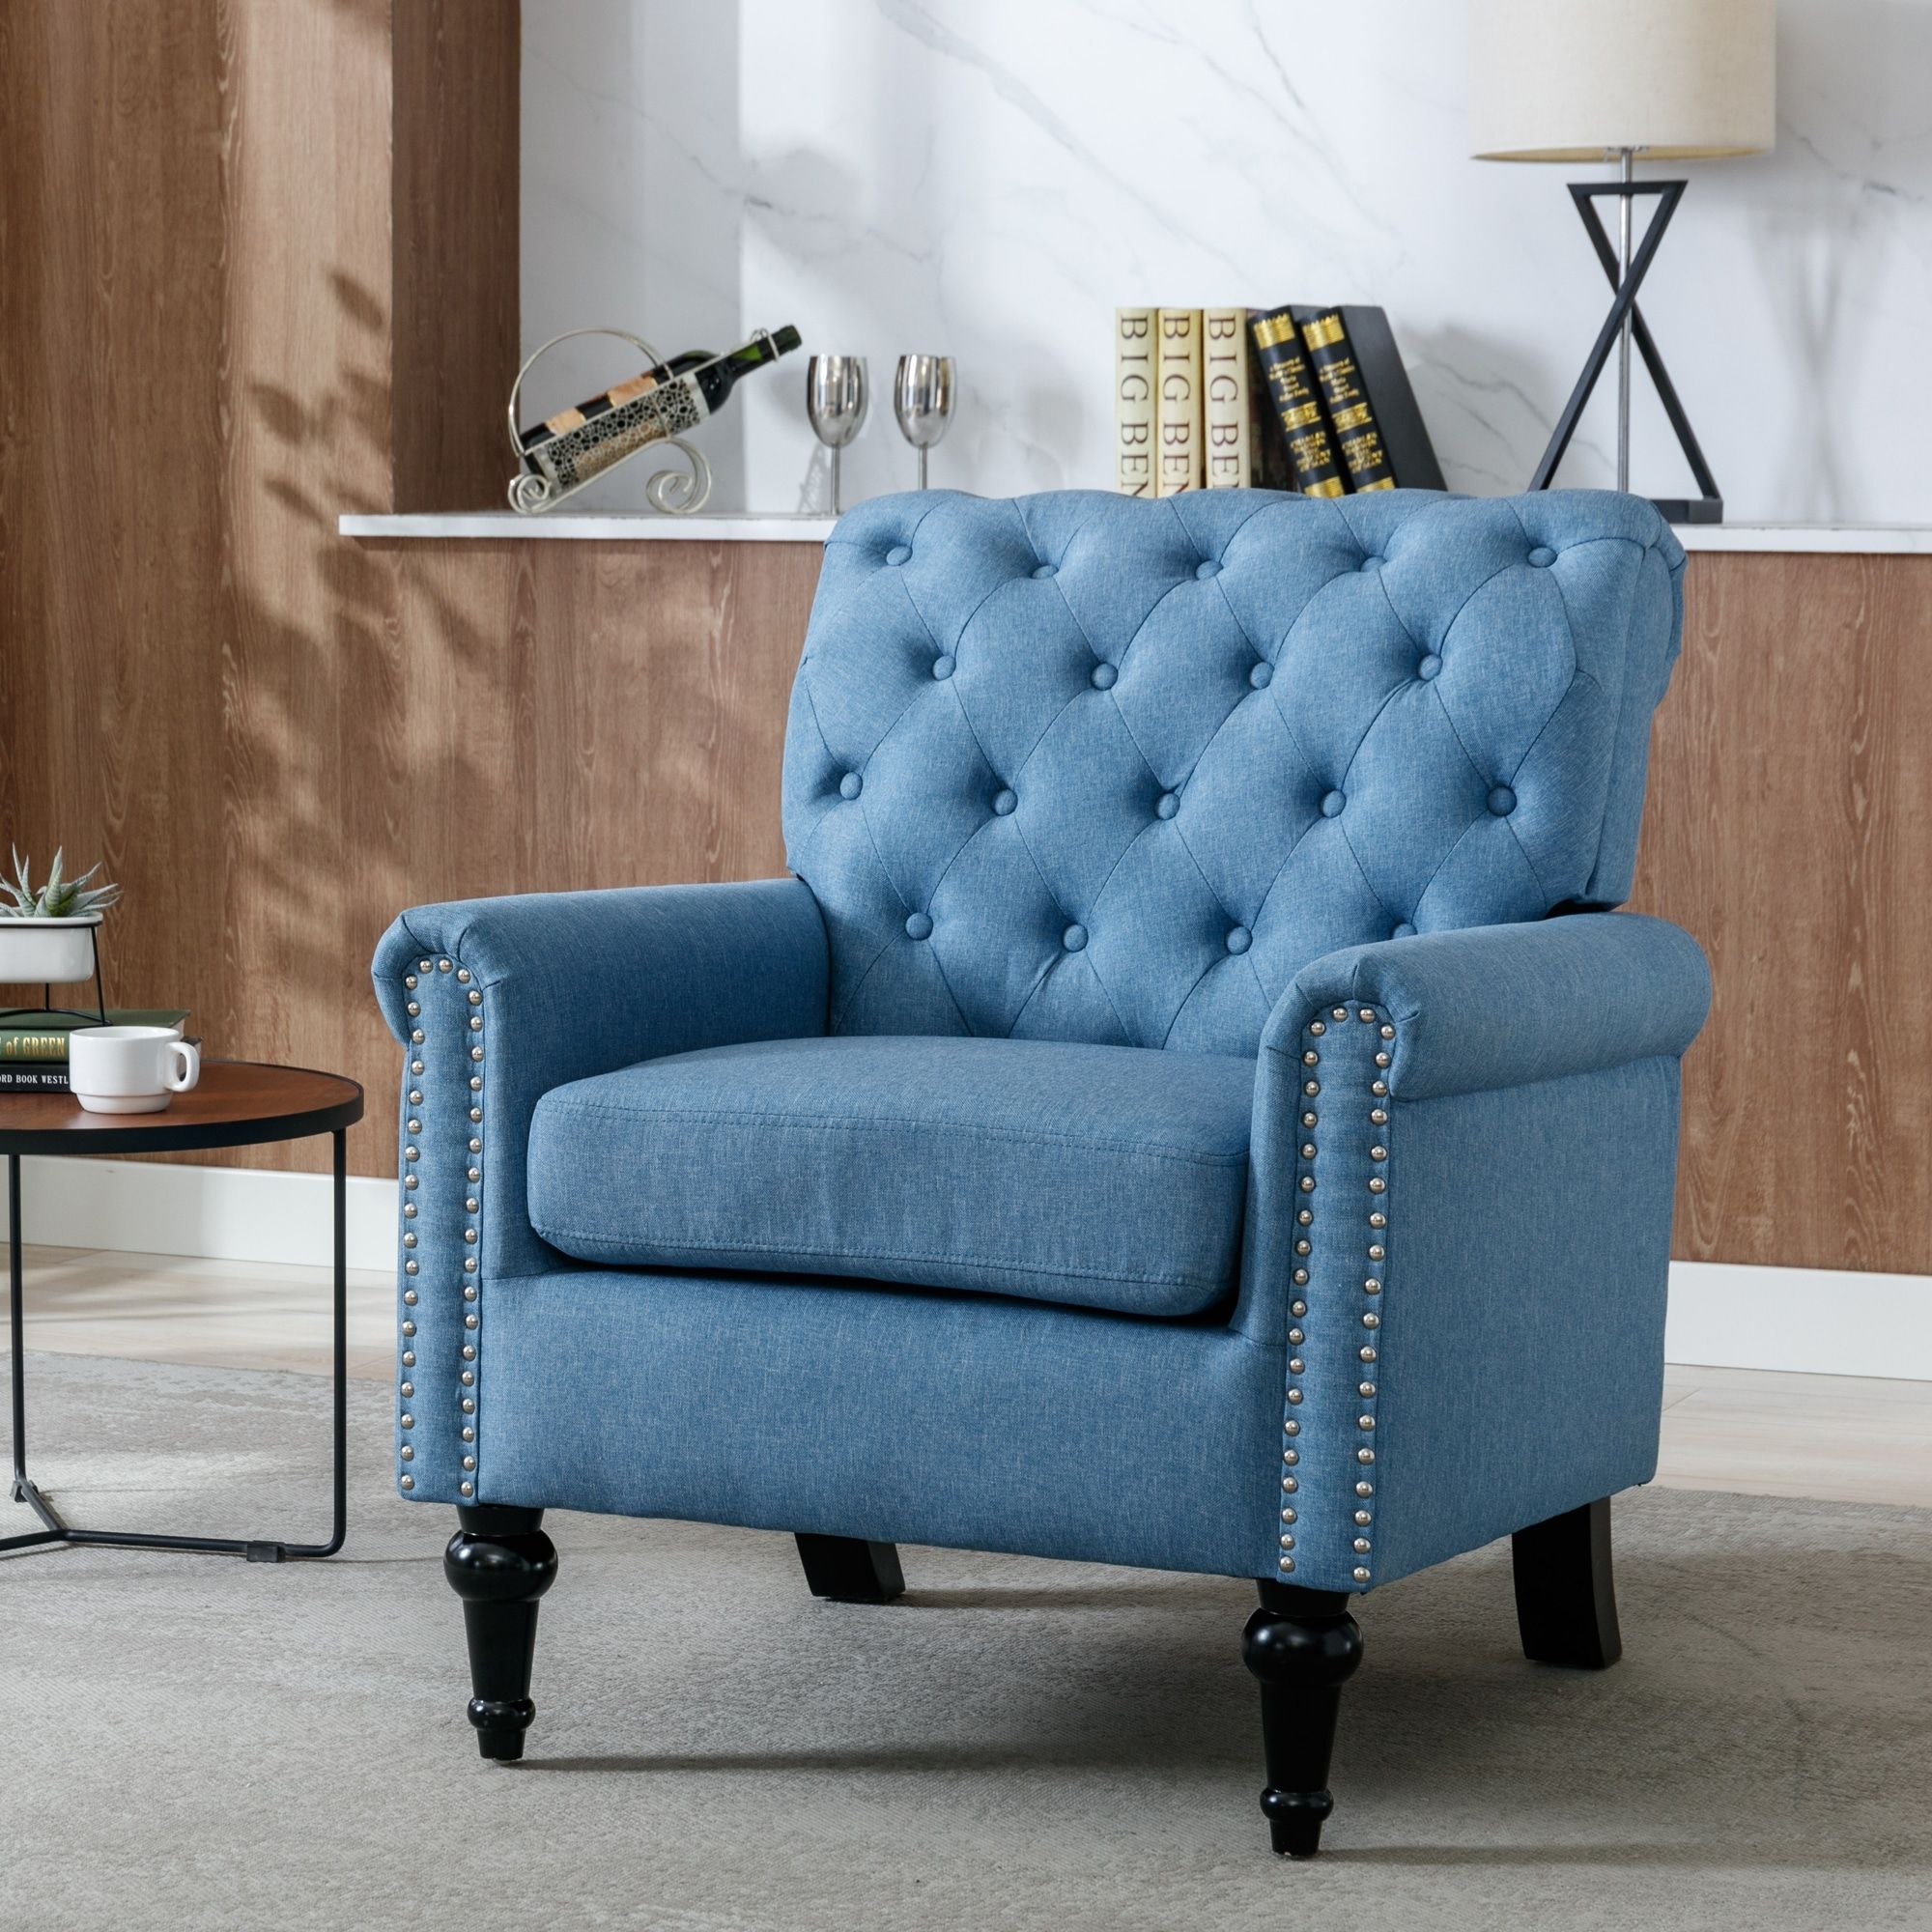 Tufted Upholstered Accent Chairs Single Sofa Chair For Livingroom With  Linen Fabric Armchairs Comfy Reading Chair – Bed Bath & Beyond – 38047189 Inside Comfy Reading Armchairs (Photo 5 of 15)